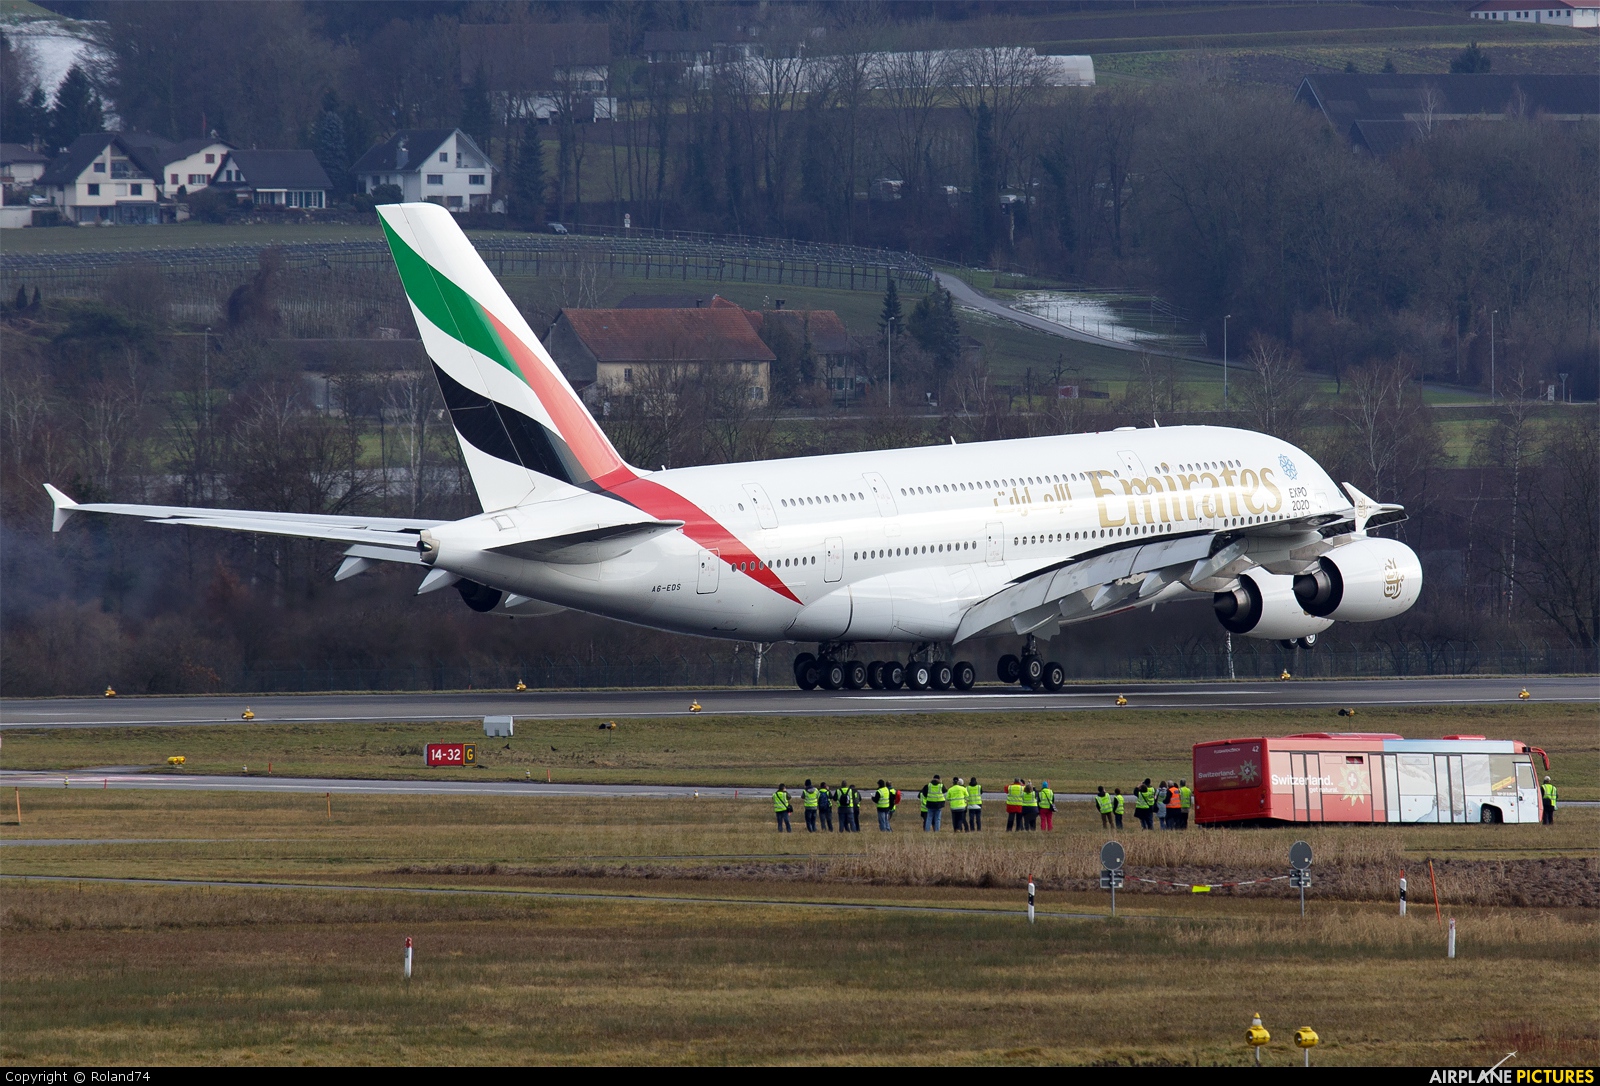 Emirates Airlines A6-EDS aircraft at Zurich